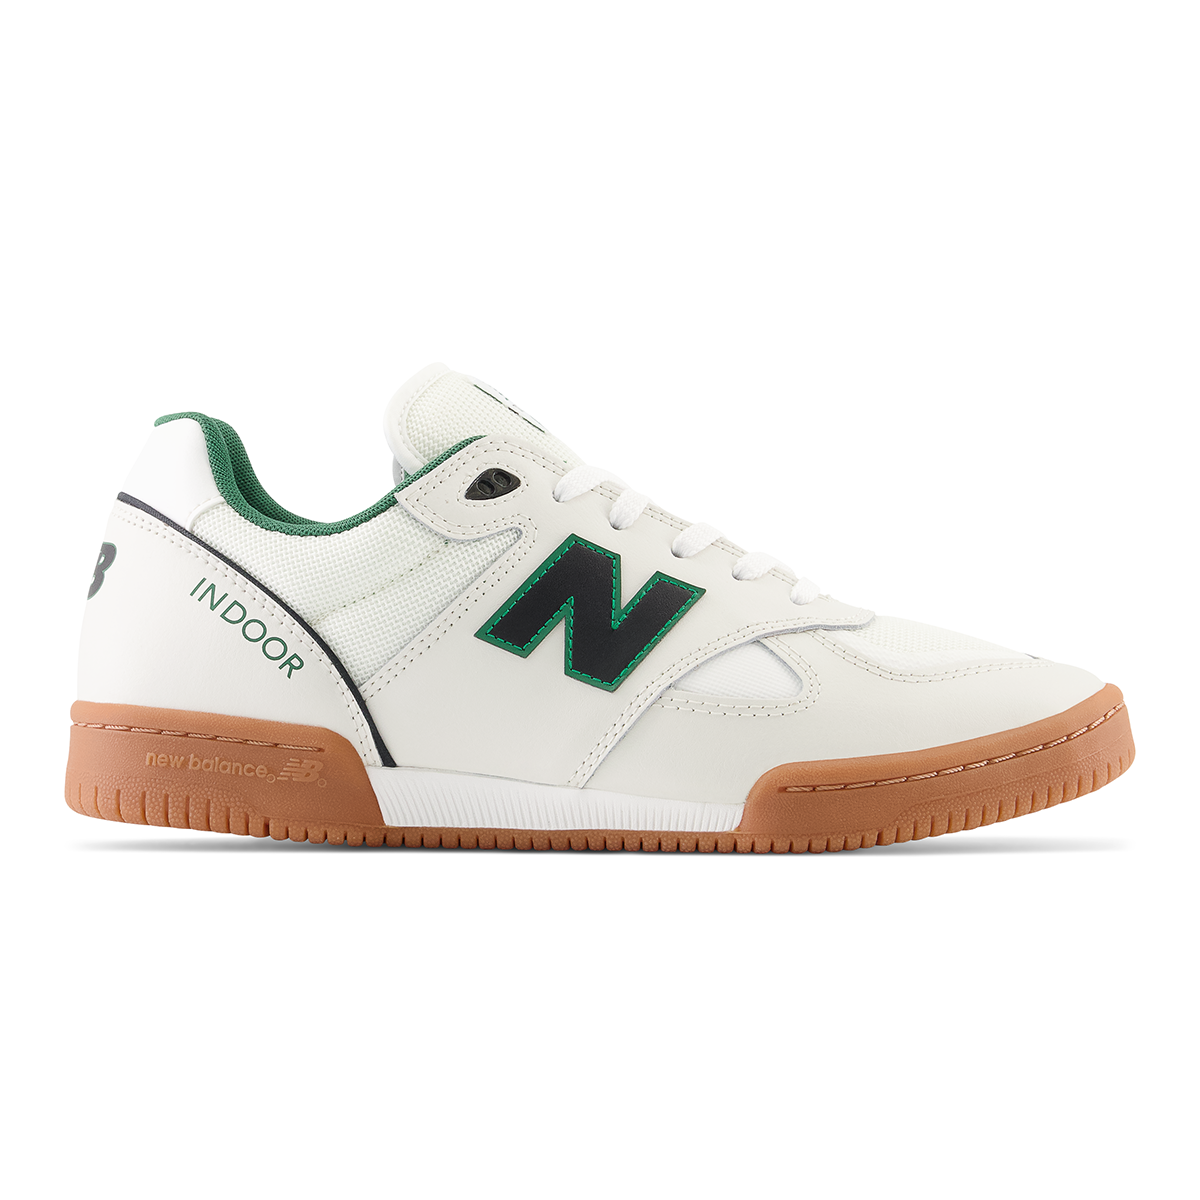 New Balance NM 600 Shoes - White/Green